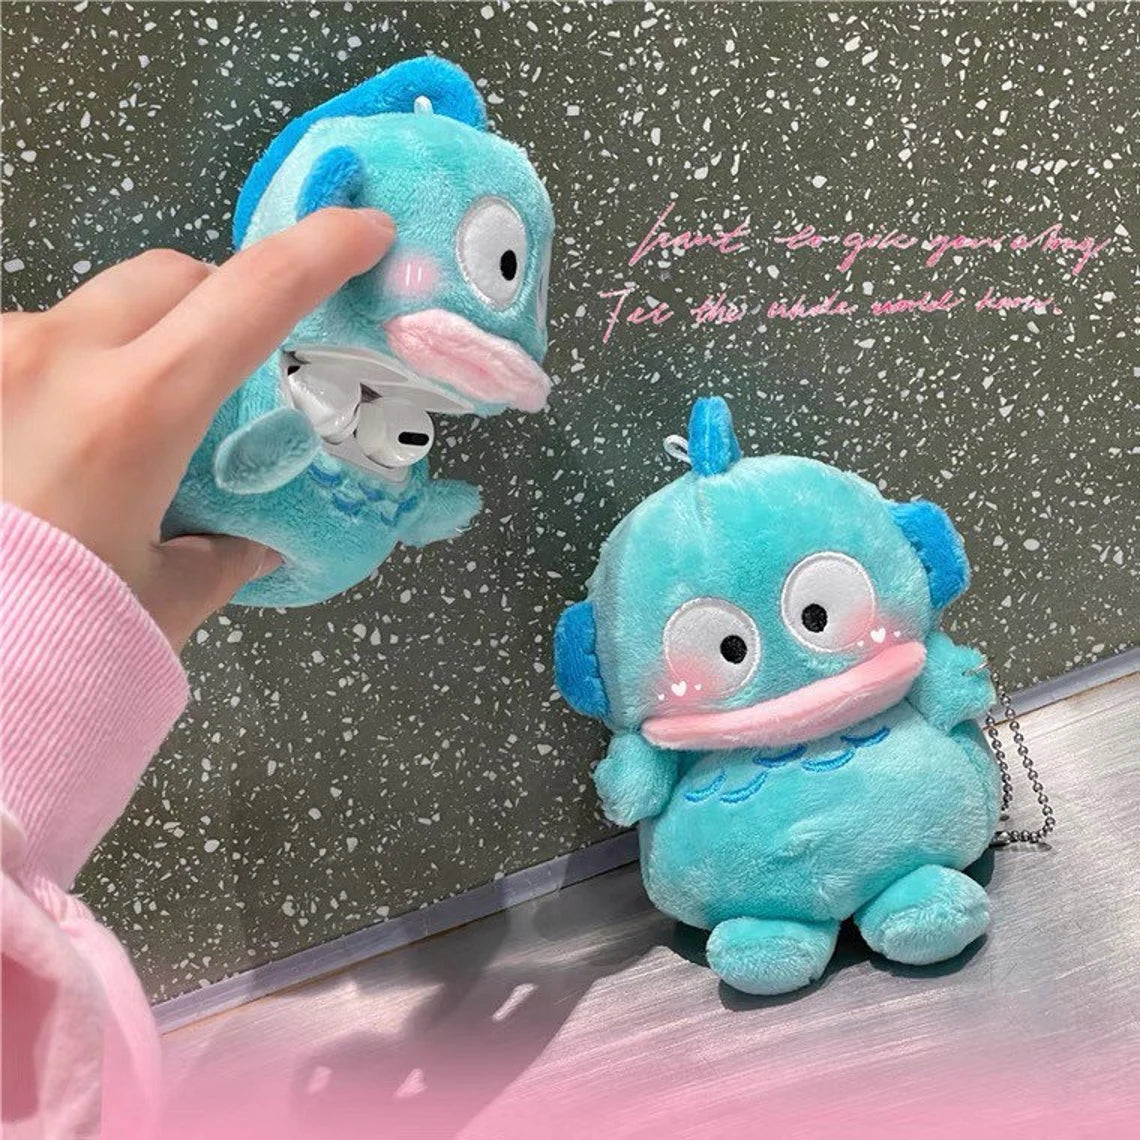 Hangyodon Plush Doll Style AirPods AirPodsPro AirPods3 Case